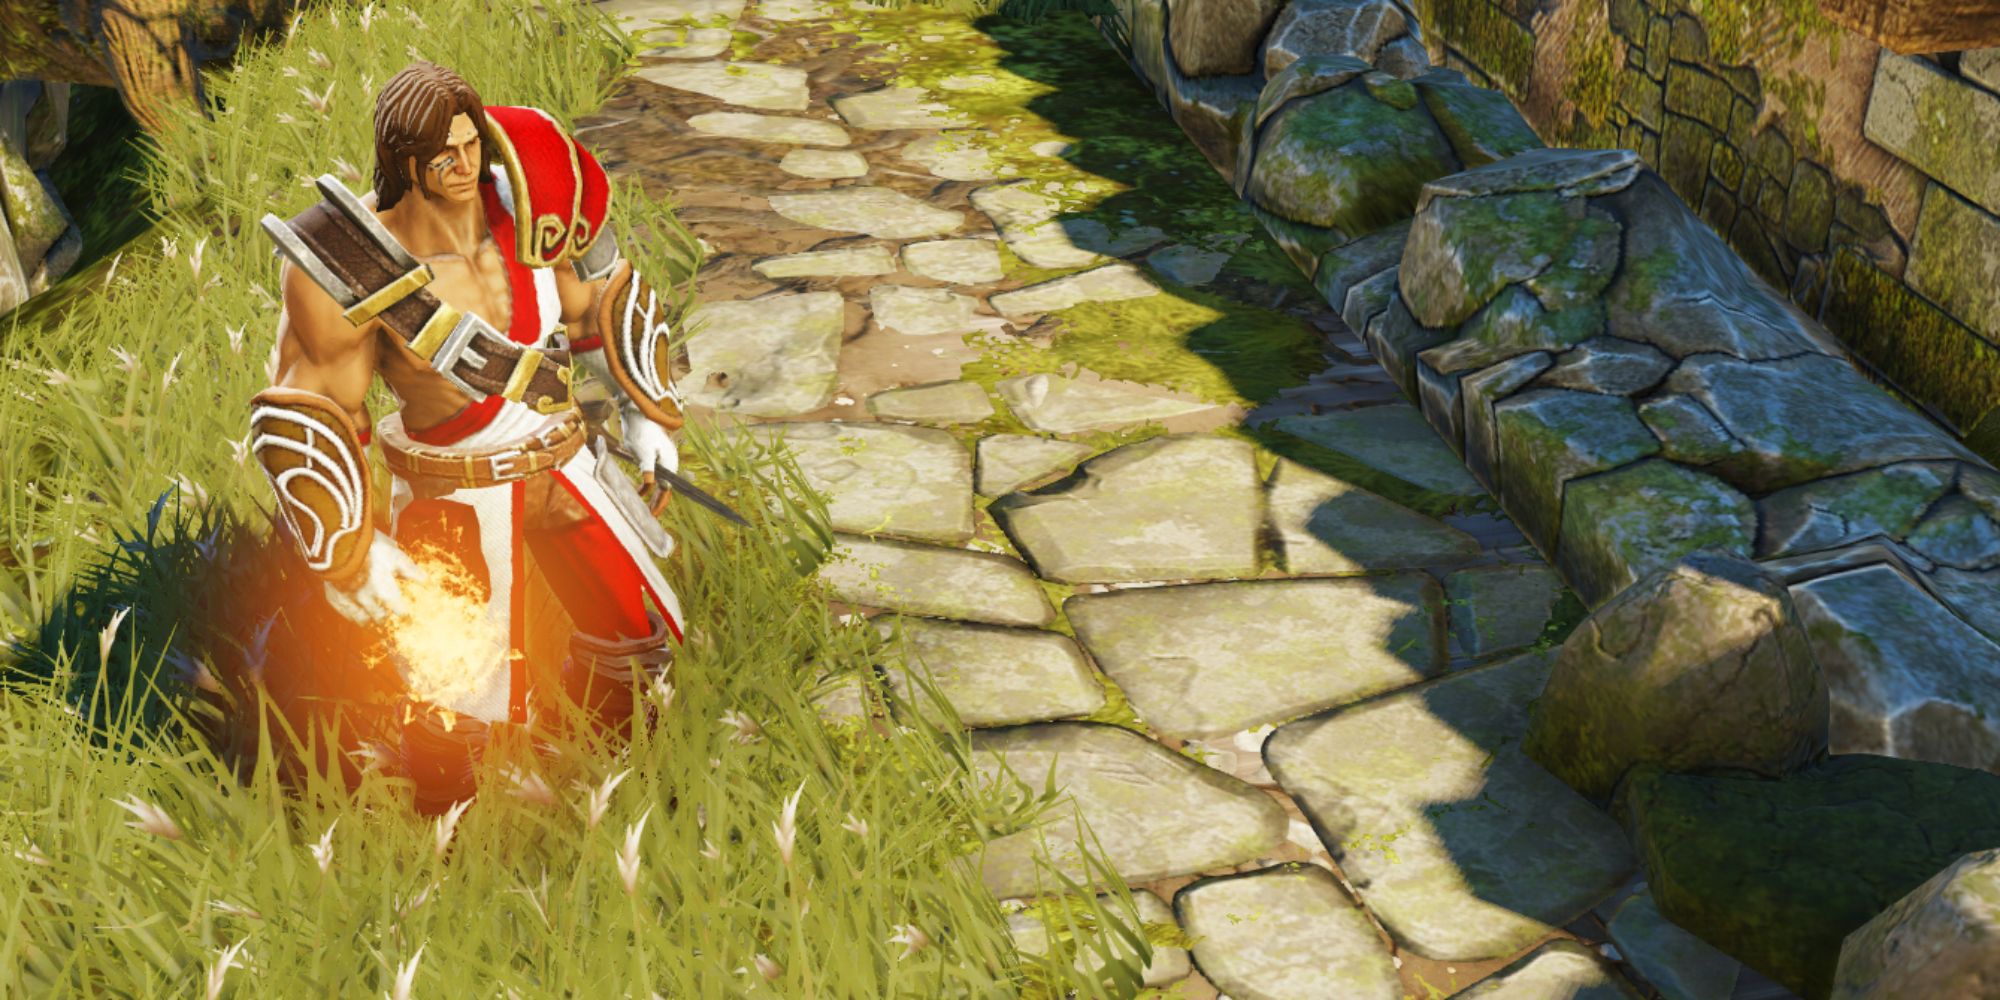 Divinity Original Sin Screenshot Of Long-Haired Character Standing On Grass Next To Cobble Road